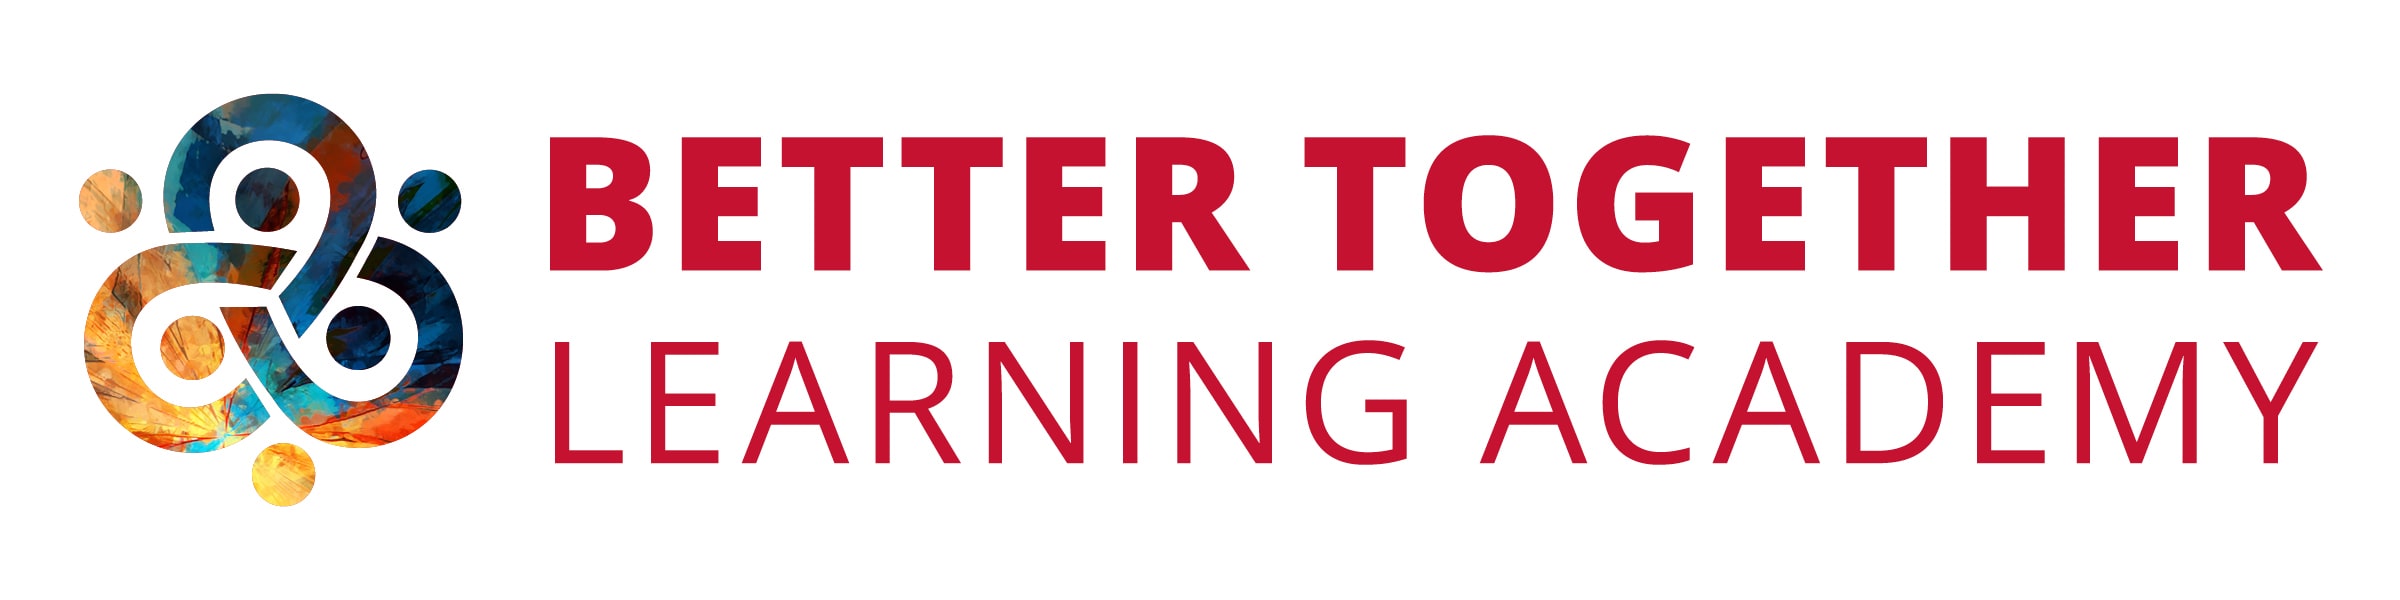 Better Together Learning Academy